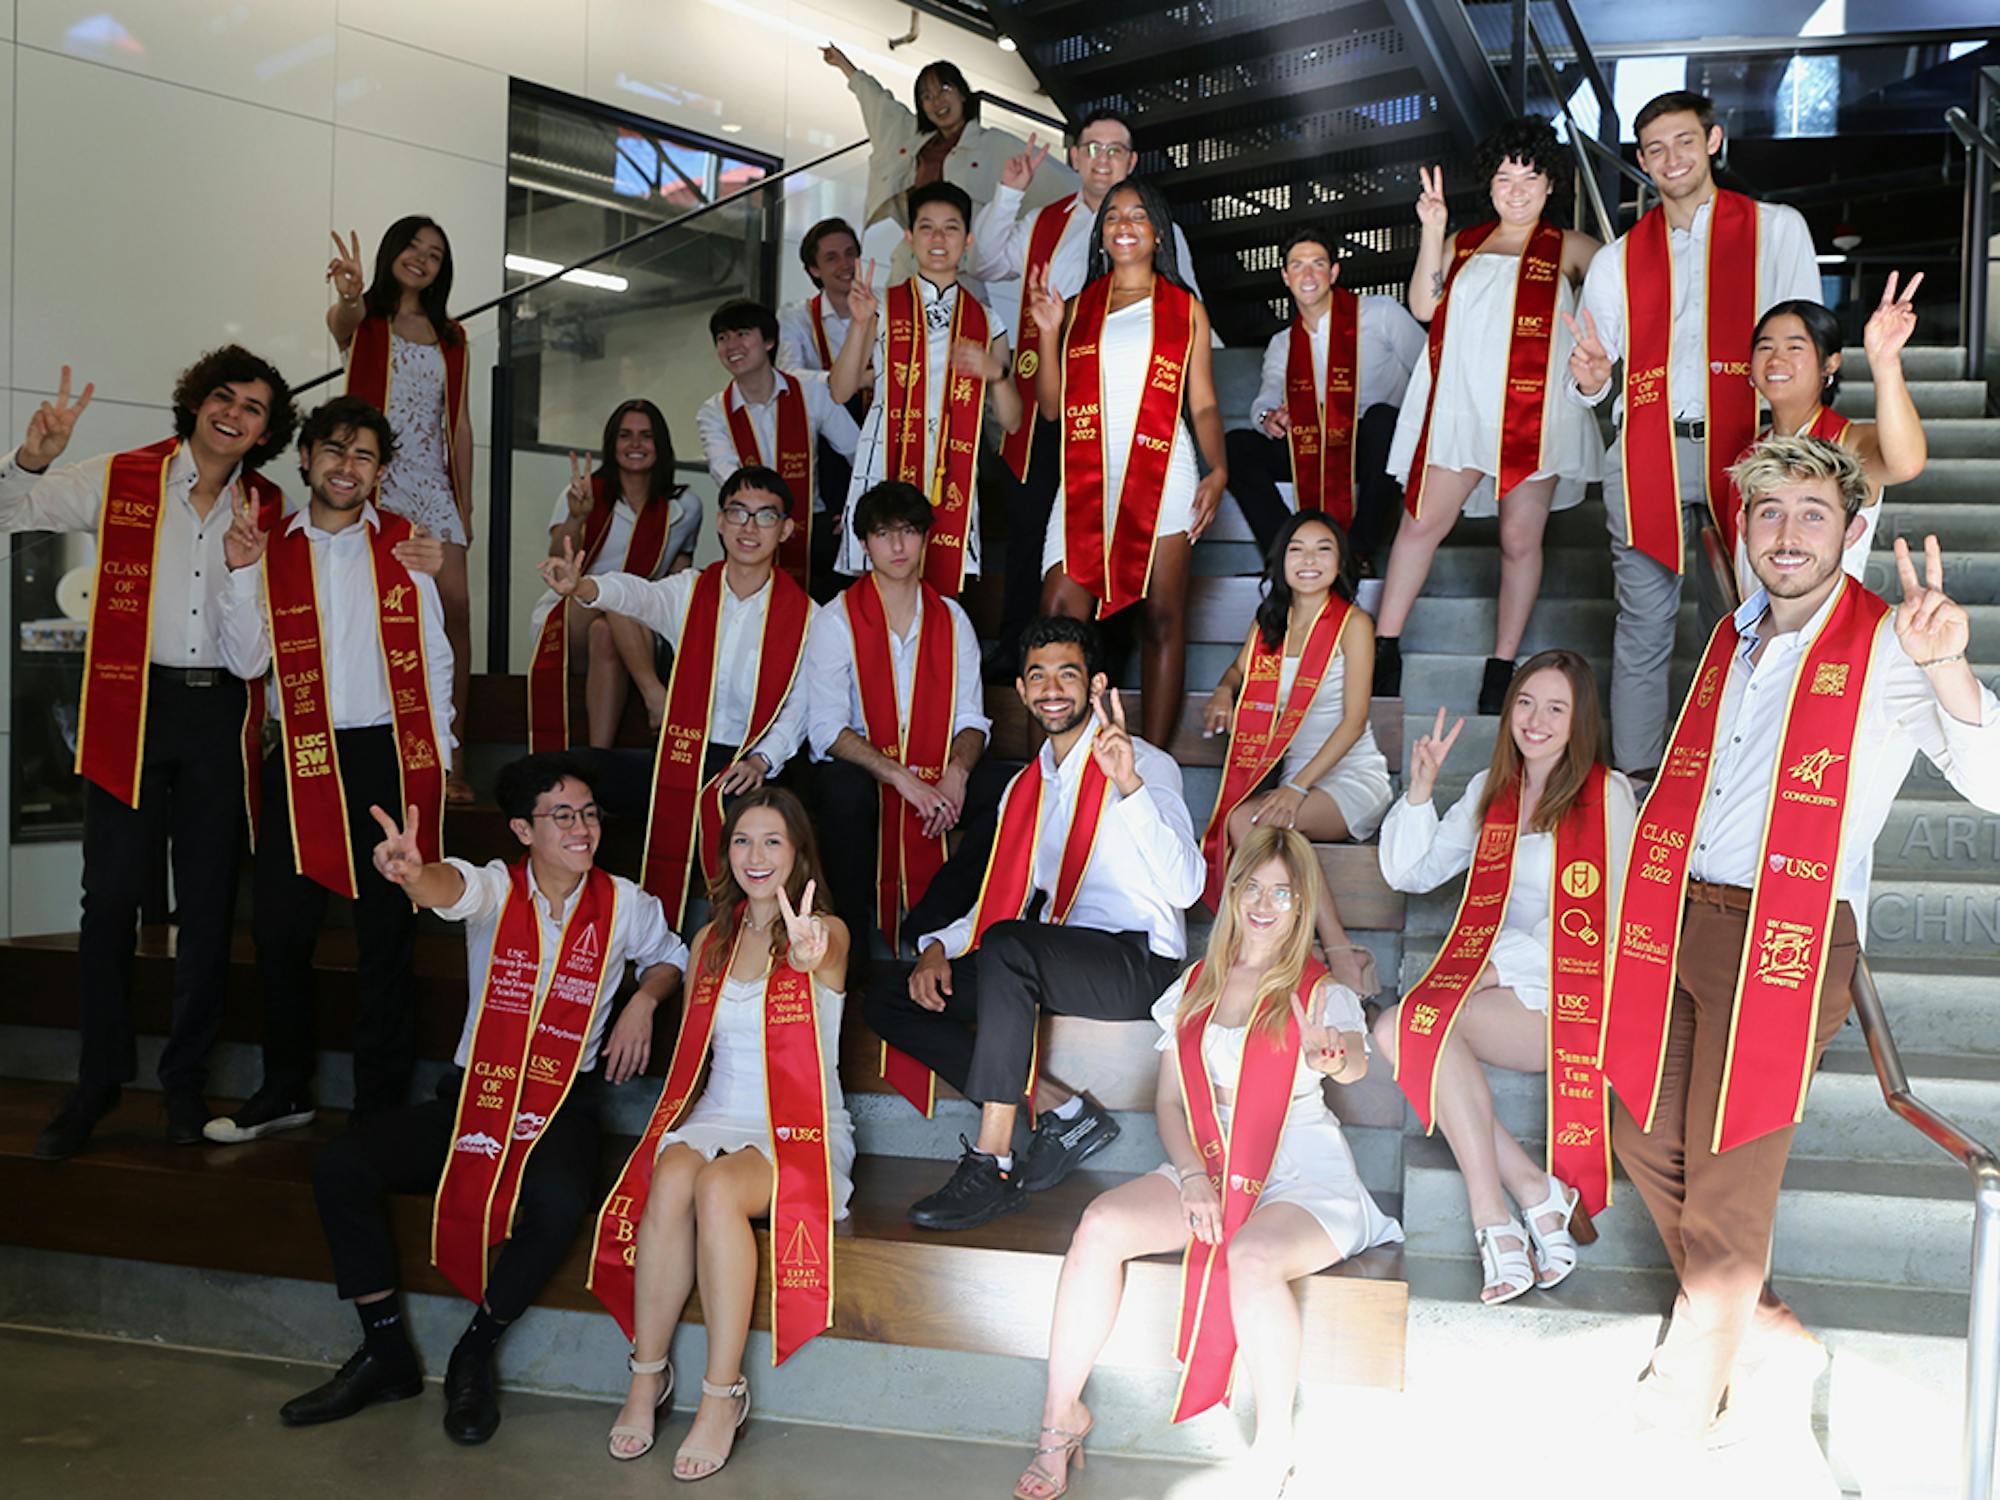 Graduating students in red sashes pose on steps